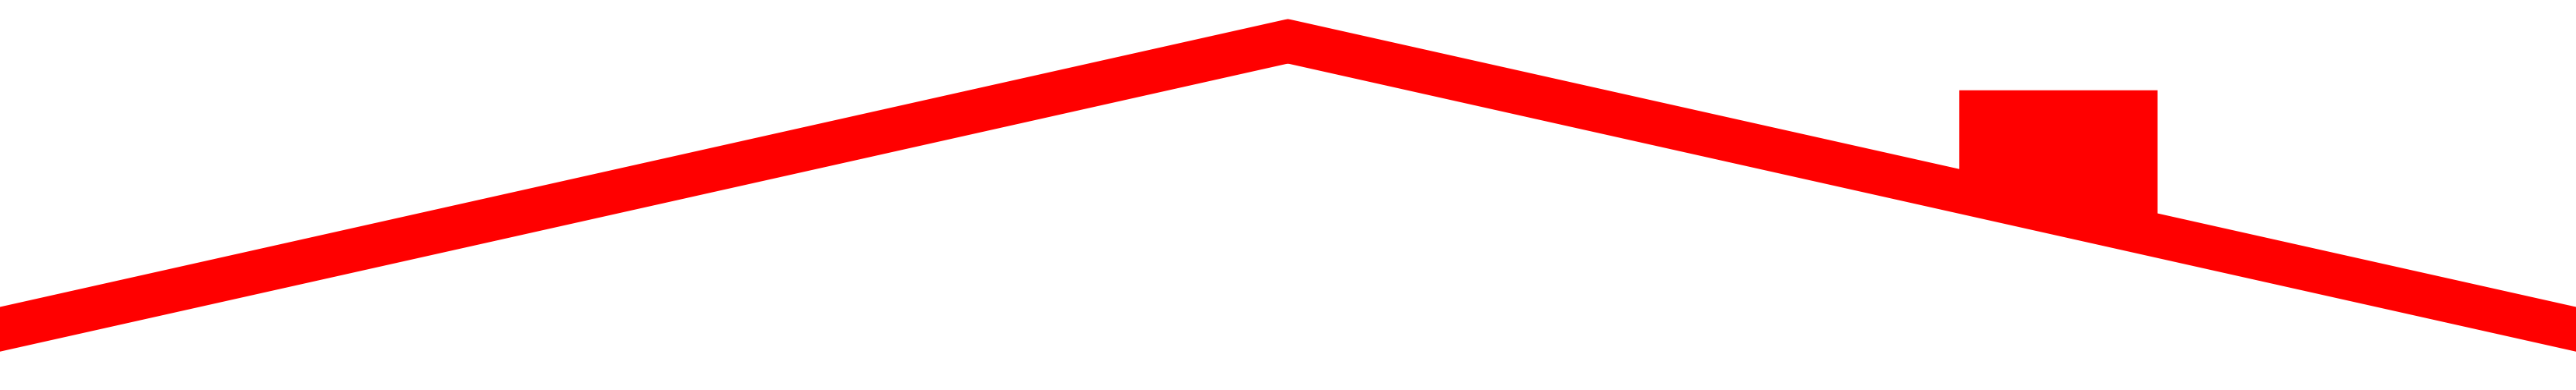 Red roof outline.